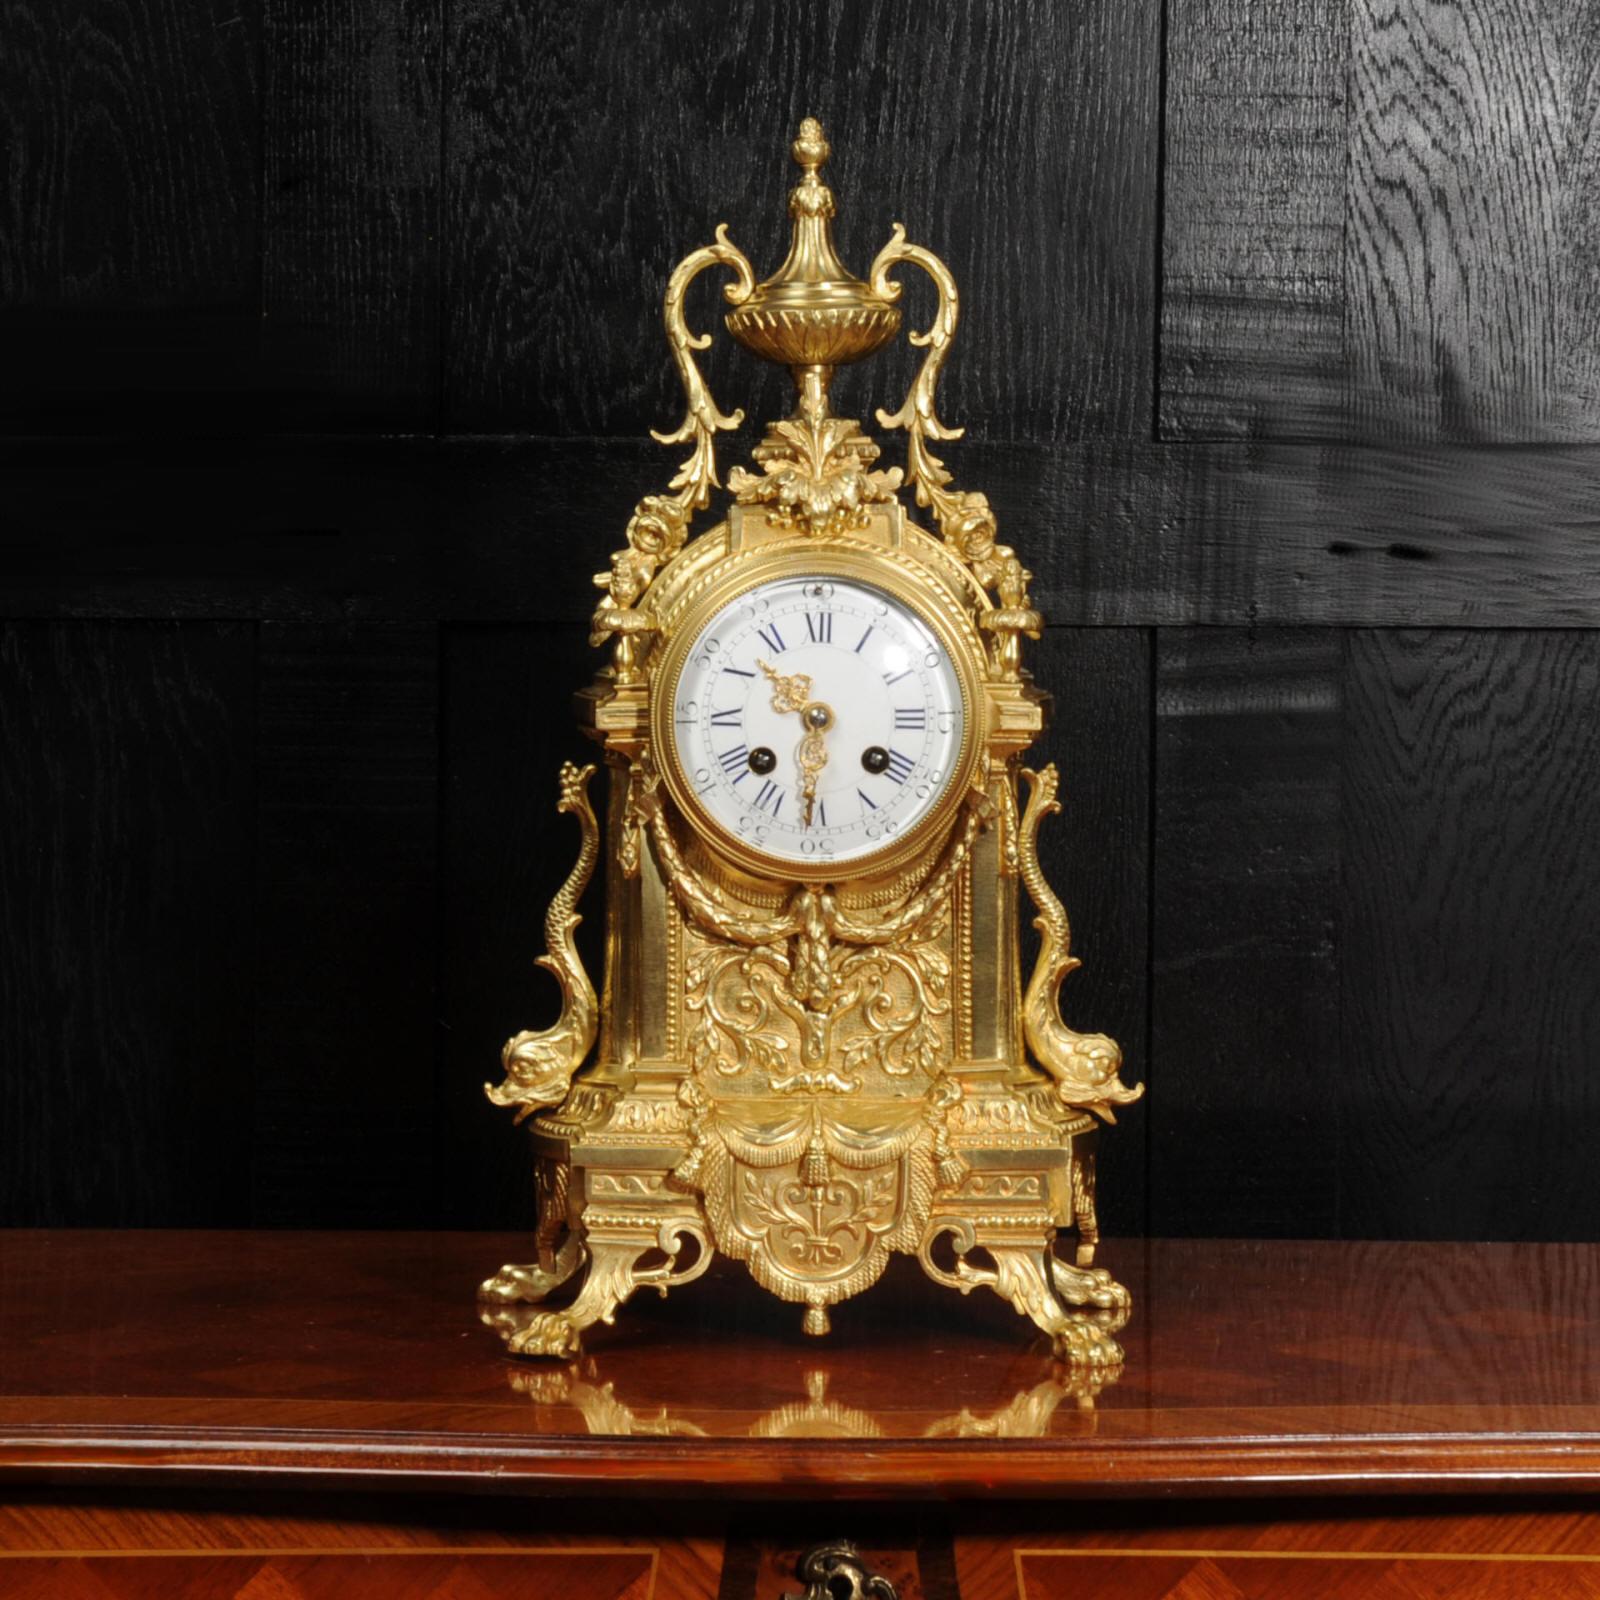 A beautiful original gilt bronze antique French clock by the renown maker Achille Brocot, circa 1880. It is of Baroque design with scrolling, trailing foliage, hairy paw feet and the clock flanked by charming figures of dolphins.

The dial is